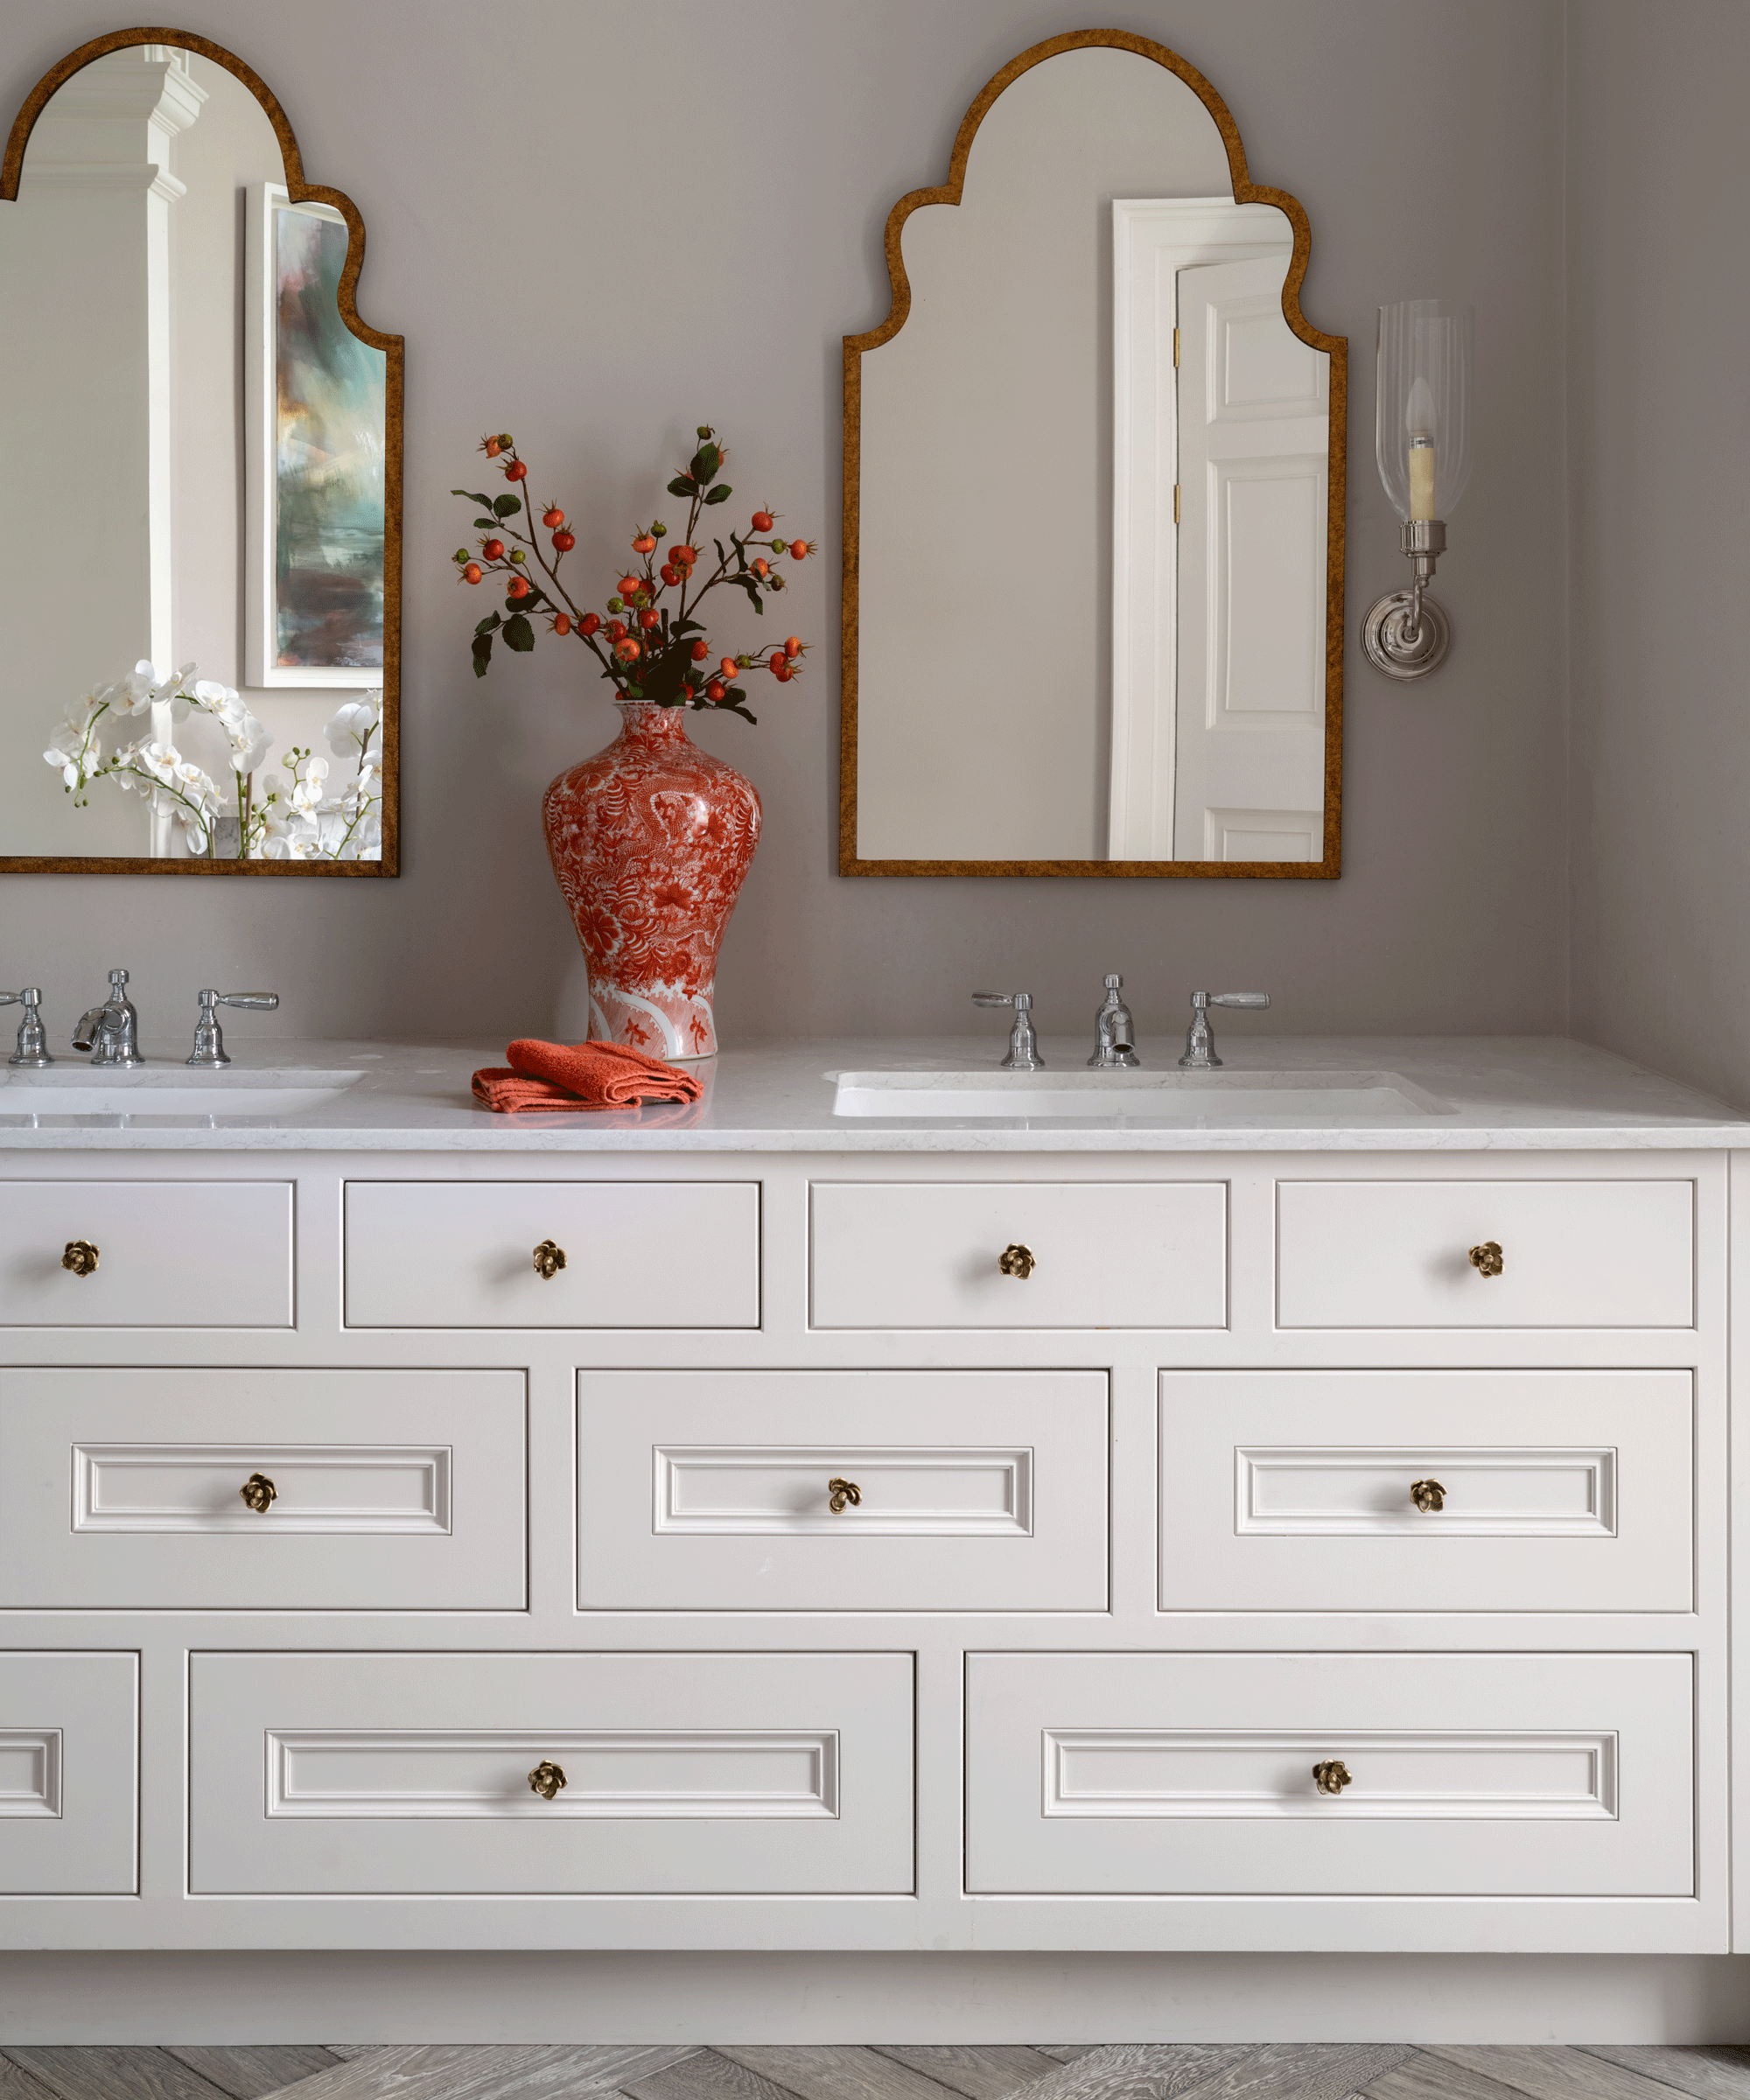 A bespoke white bathroom vanity unit with multiple storage drawers and a red vase sat on top